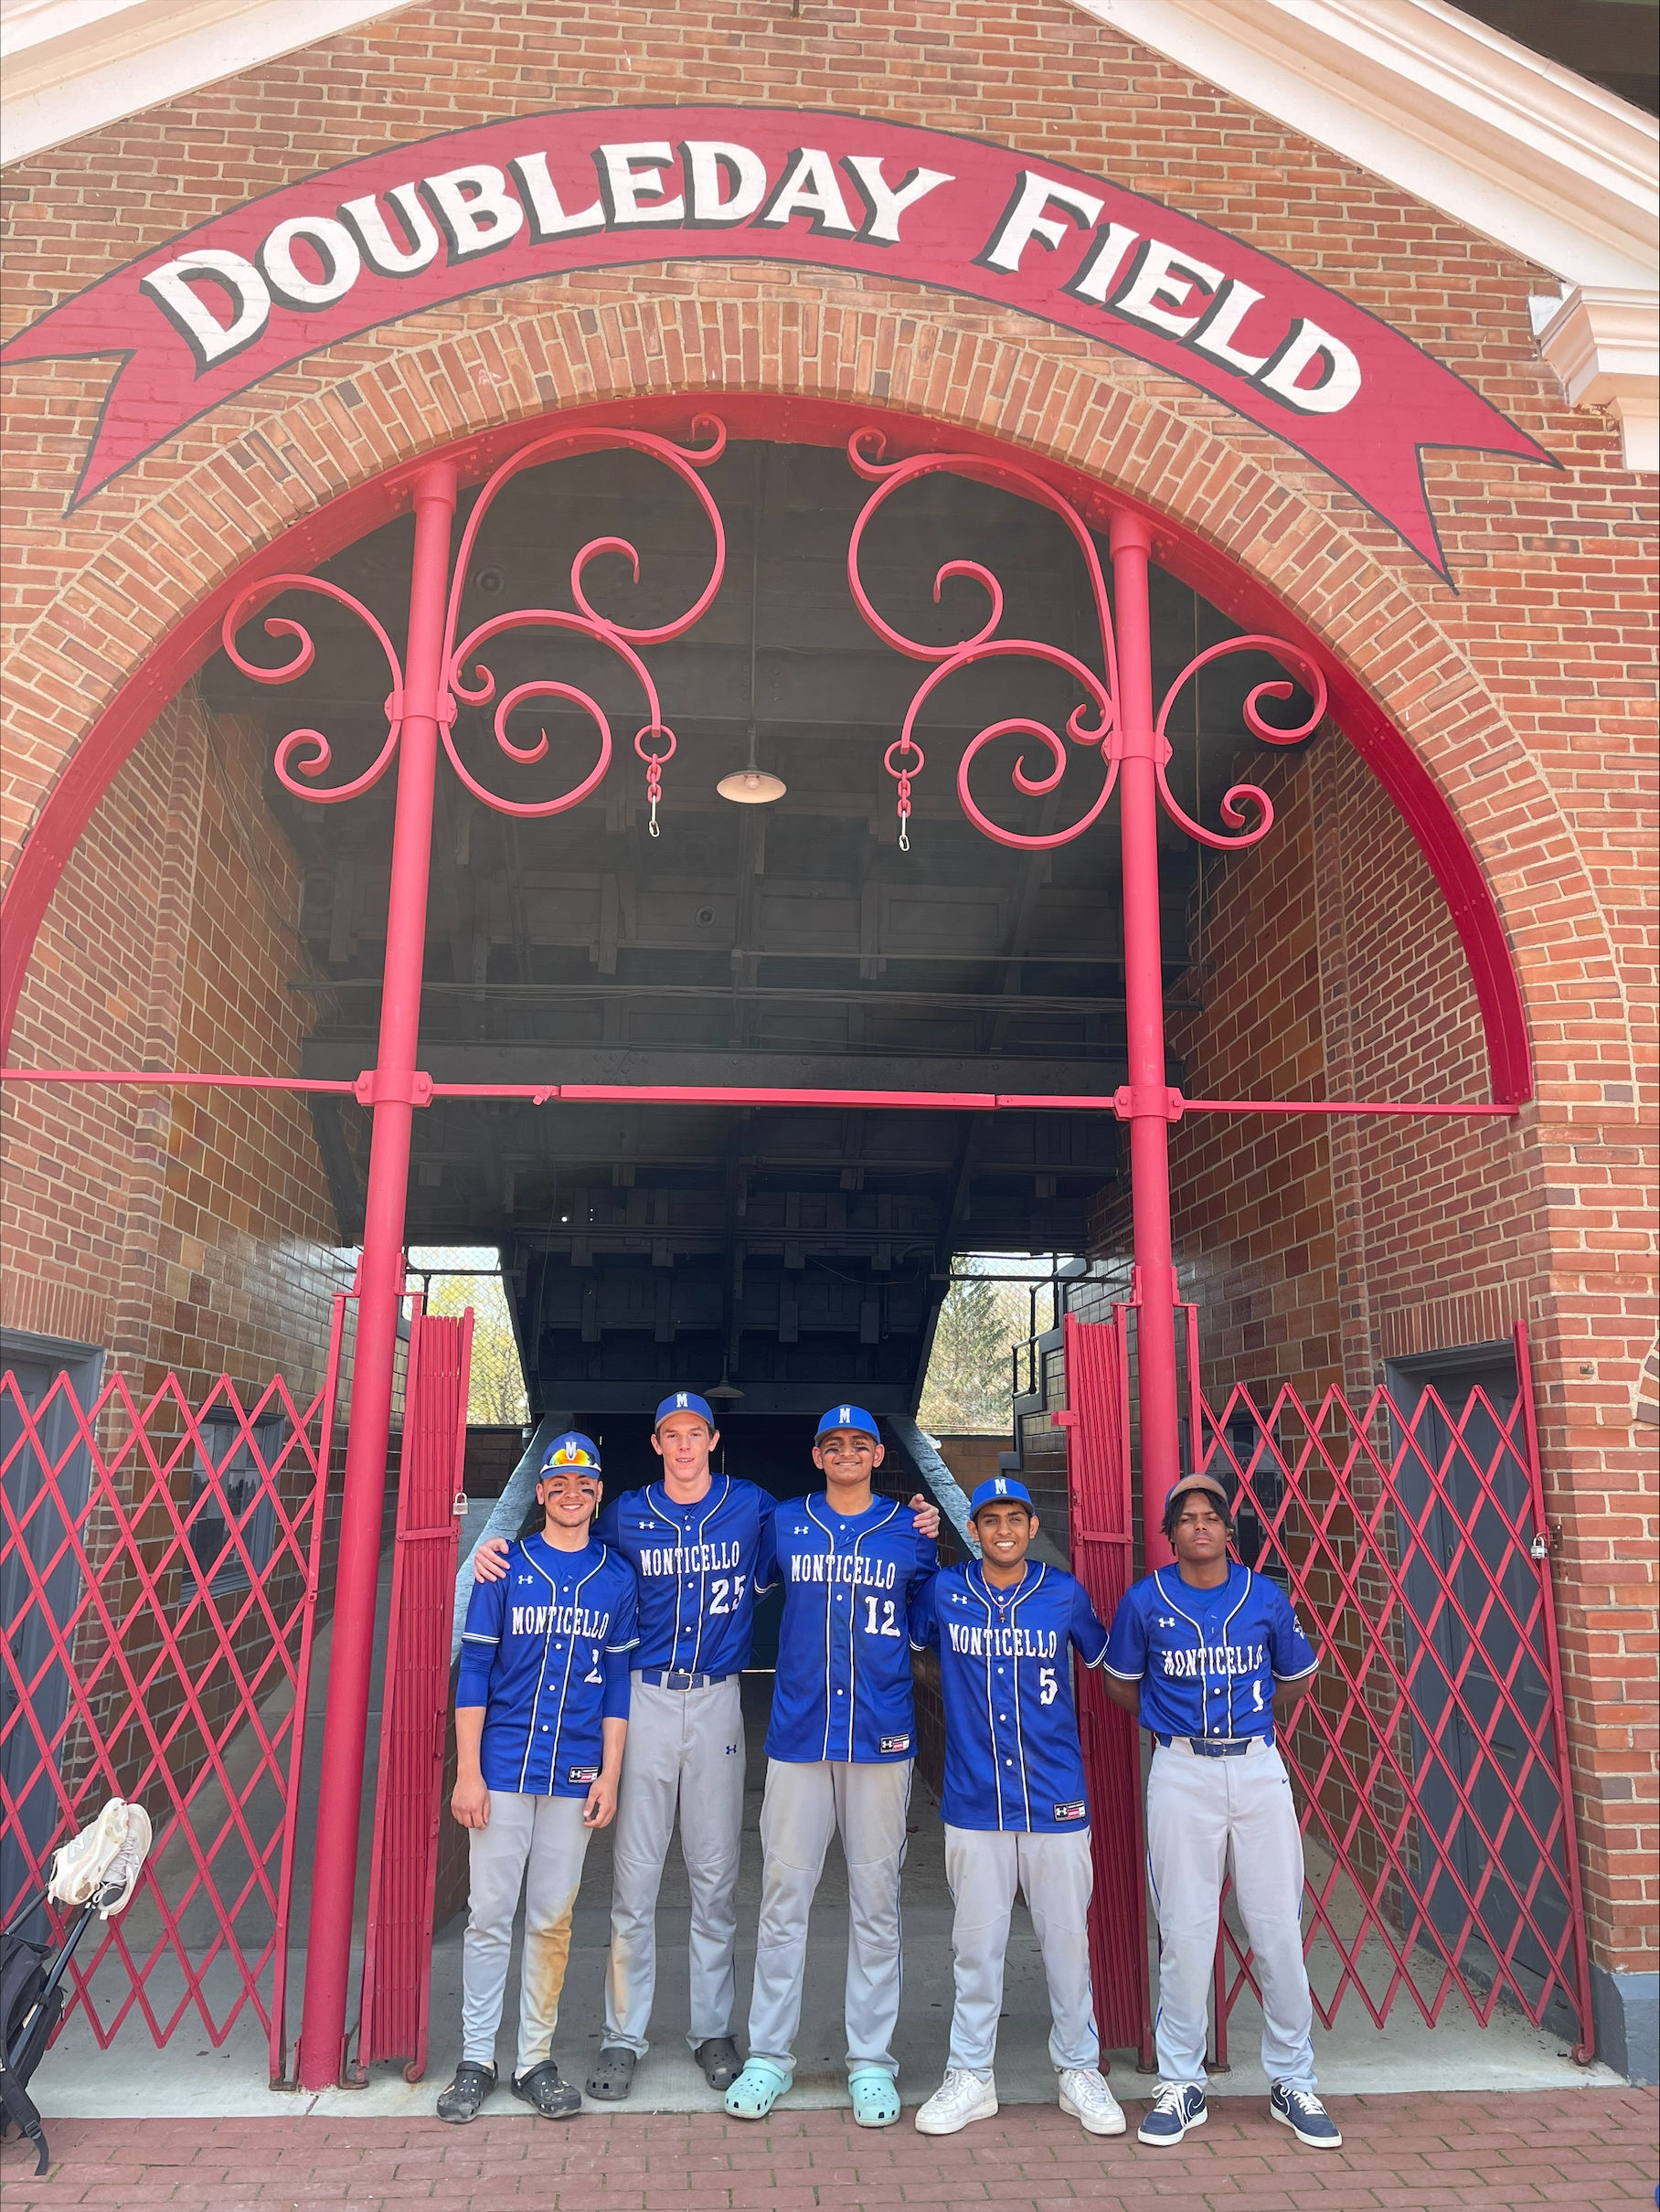 the baseball team is posing in front of the sign that says Doubleday Field 